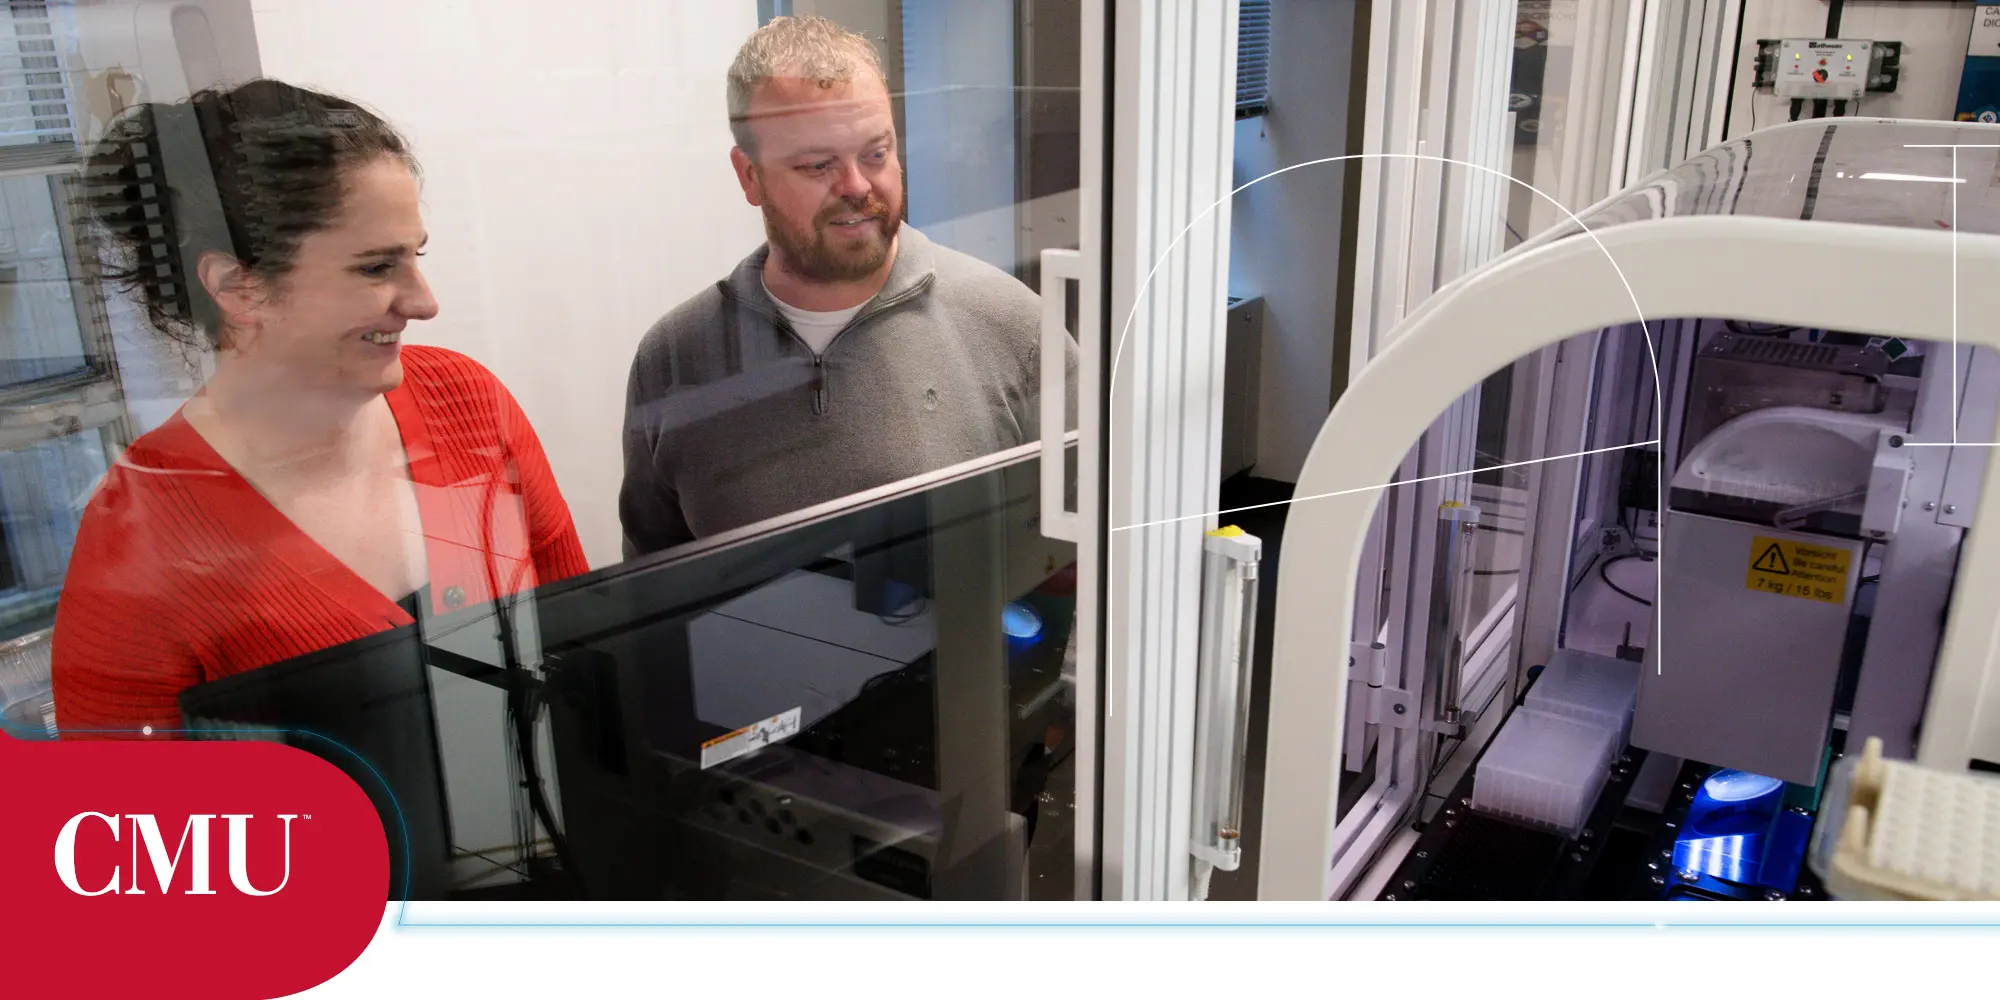 Two Carnegie Mellon University scientists looking at automated lab equipment, behind glass.